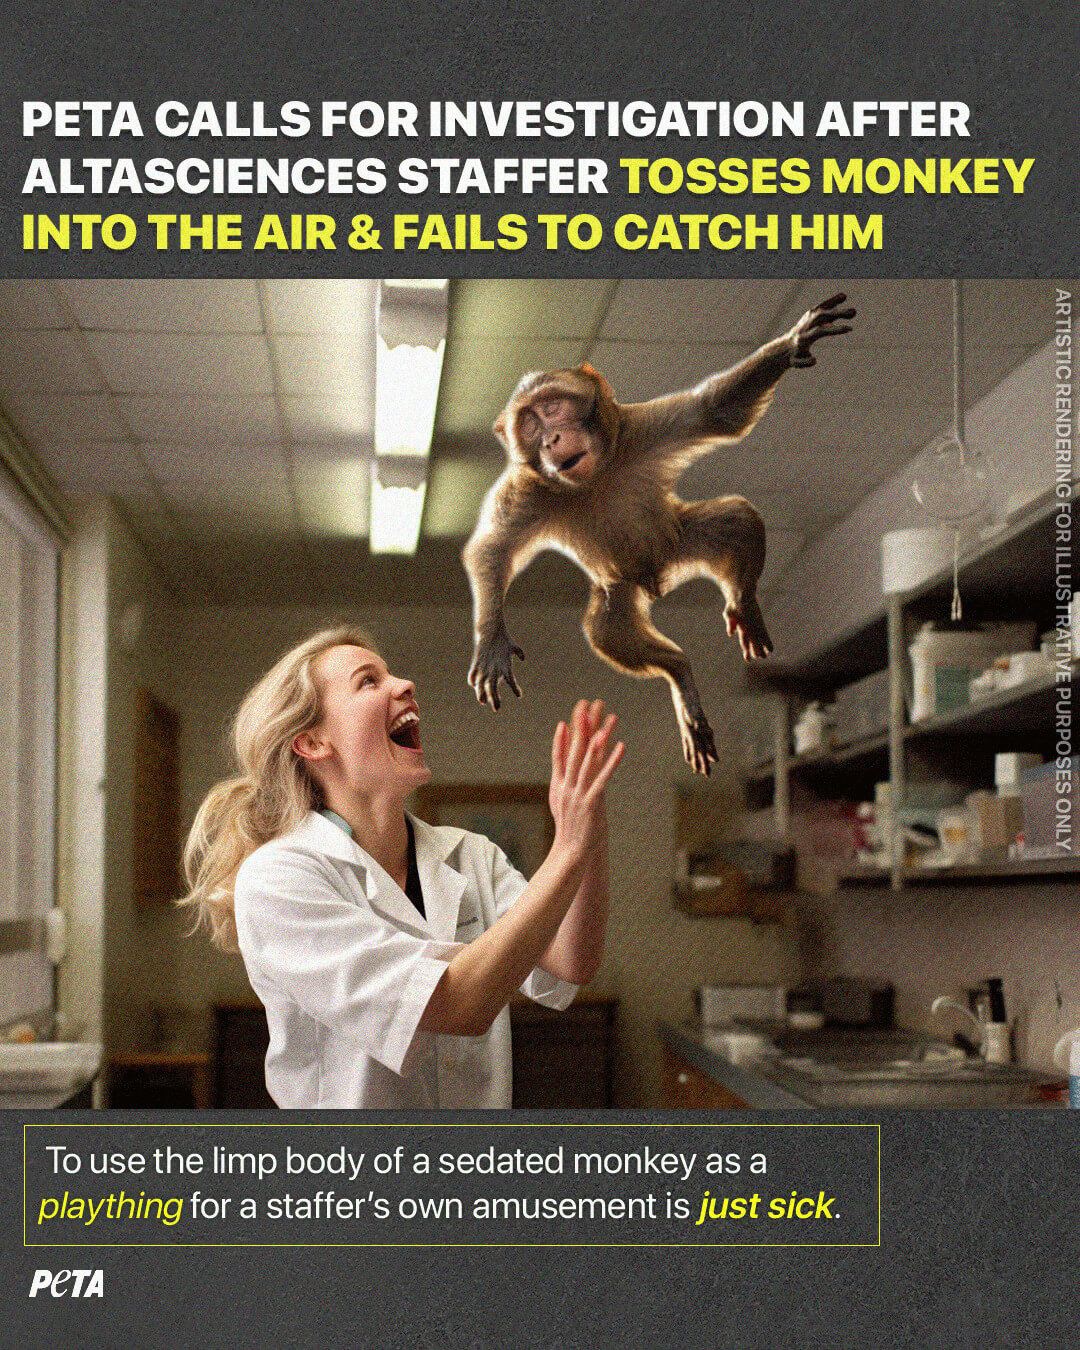 Illustration of a woman in a lab tossing a sedated monkey in the air. Text reads "PETA Calls for Investigation After Altasciences Staffer Tosses Monkey in the Air and Fails to Catch Him. To use the limp body of a sedated monkey as a plaything for a staffer's own amusement is just sick.